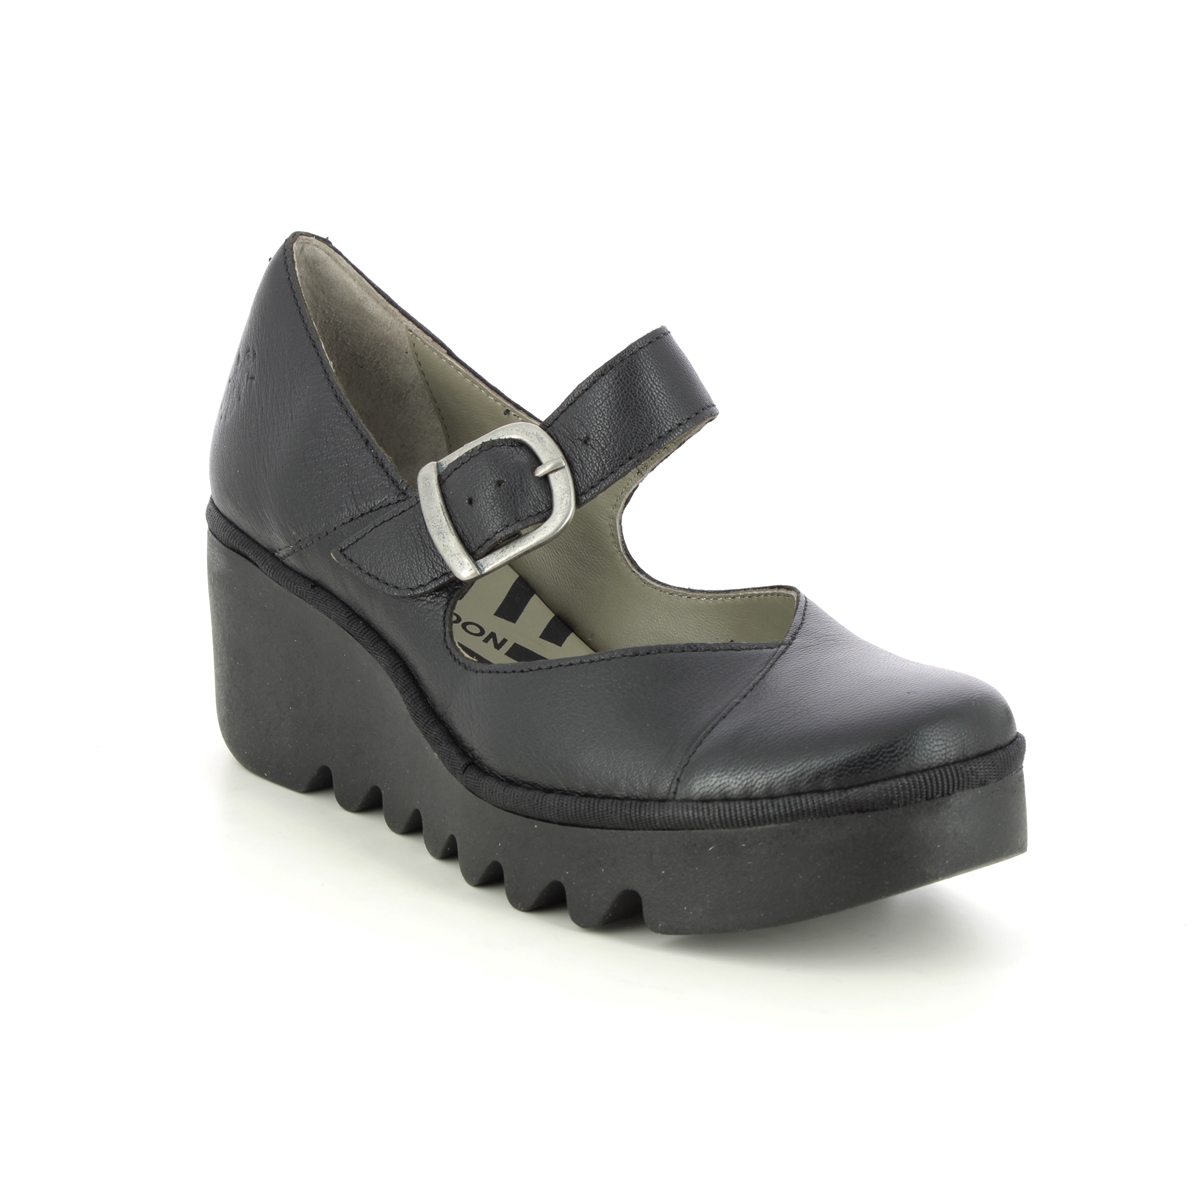 Fly London Baxe  Blu Lmj Black Leather Womens Wedge Shoes P501428-000 in a Plain Leather in Size 38